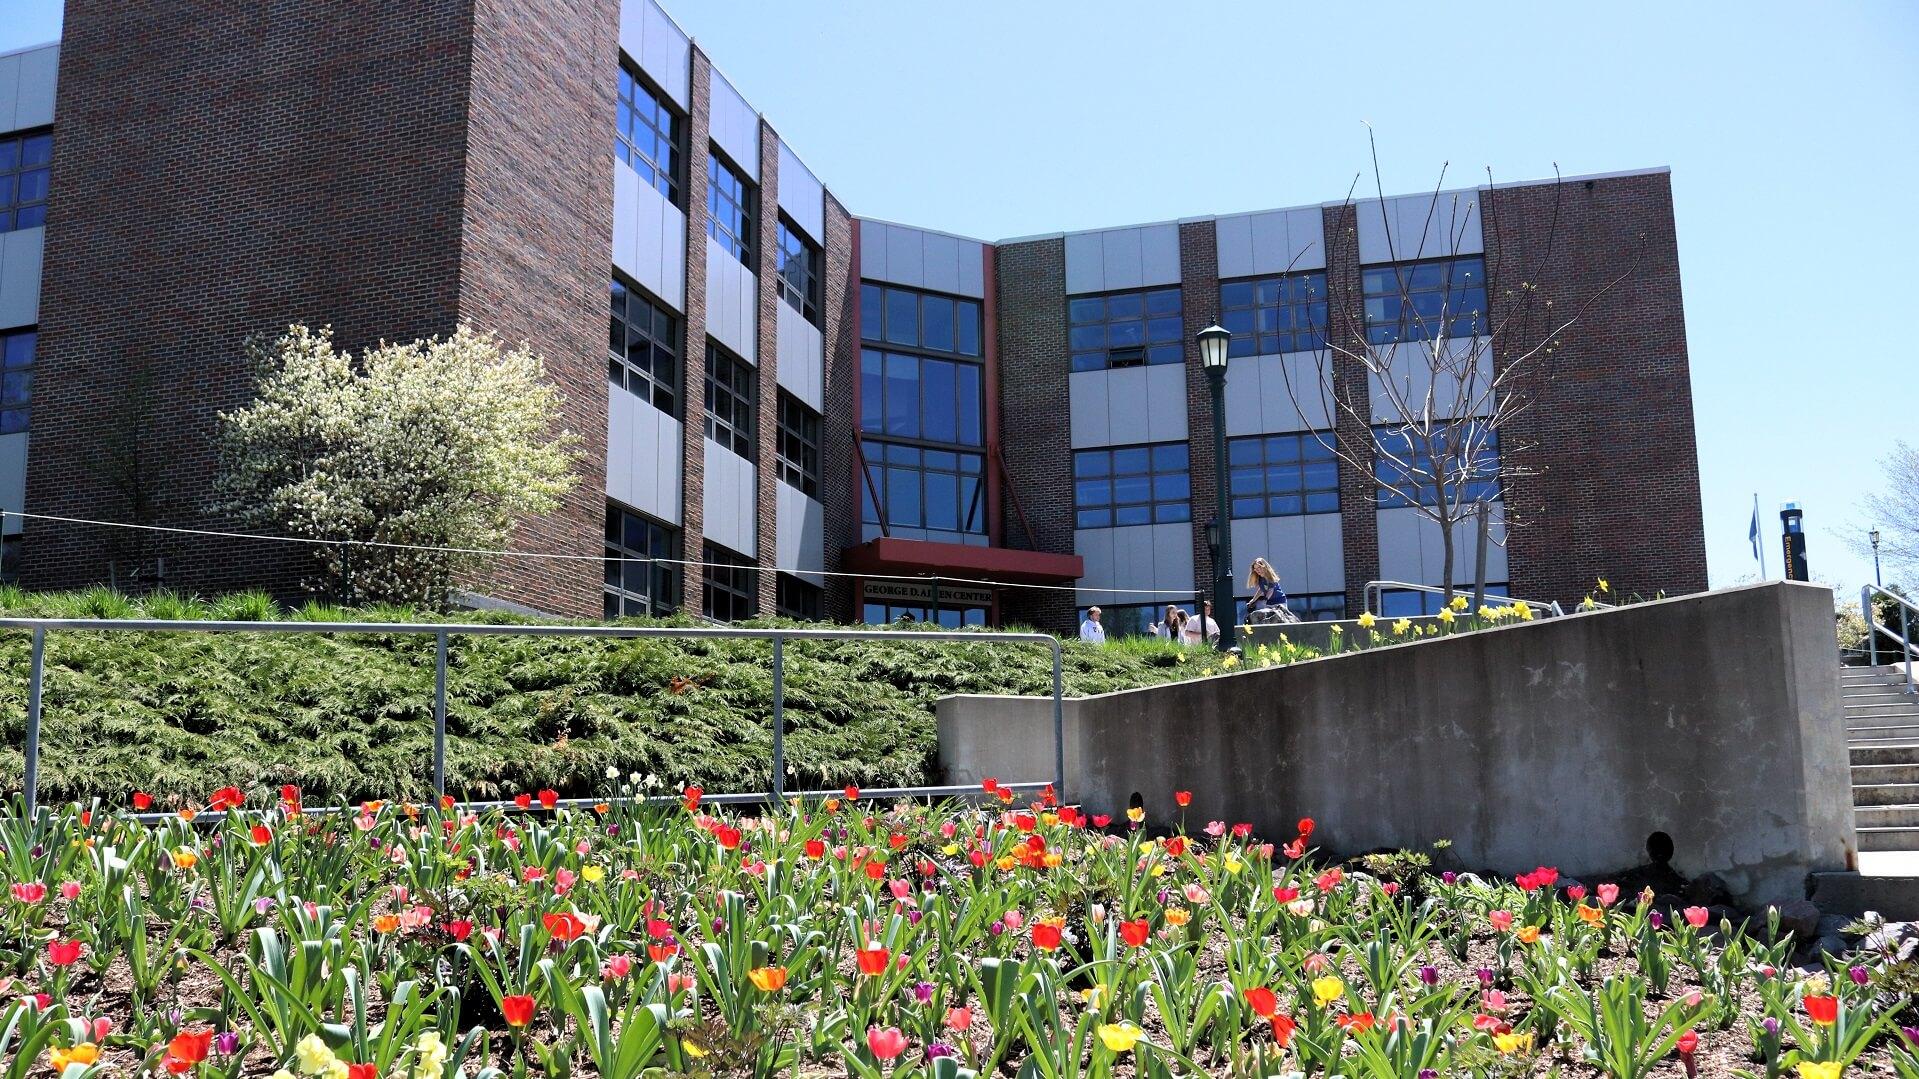 A view of the Aiken Center building with a garden of tulips and a blooming tree in front of the building